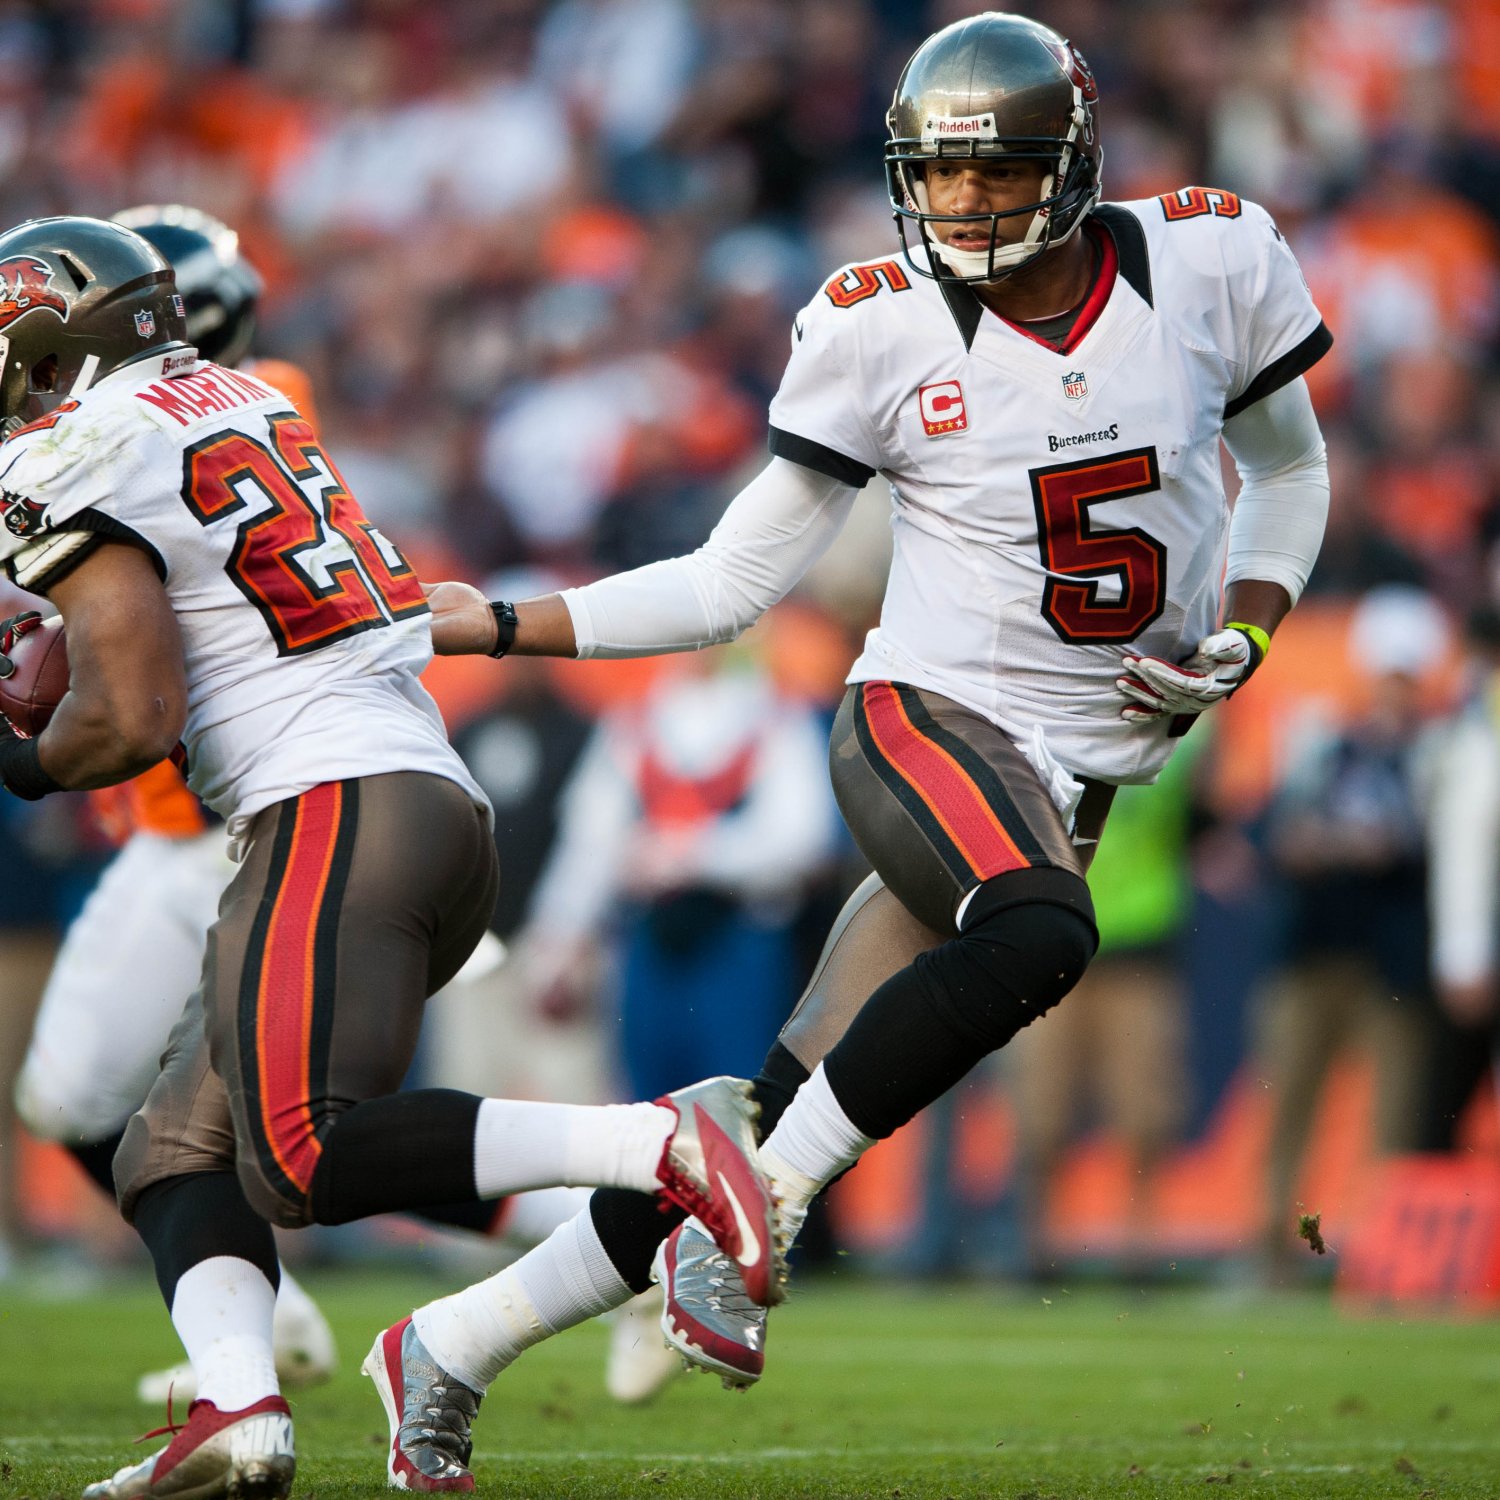 2013 Tampa Bay Buccaneers Schedule: Full Listing of Dates, Times and TV Info | Bleacher Report